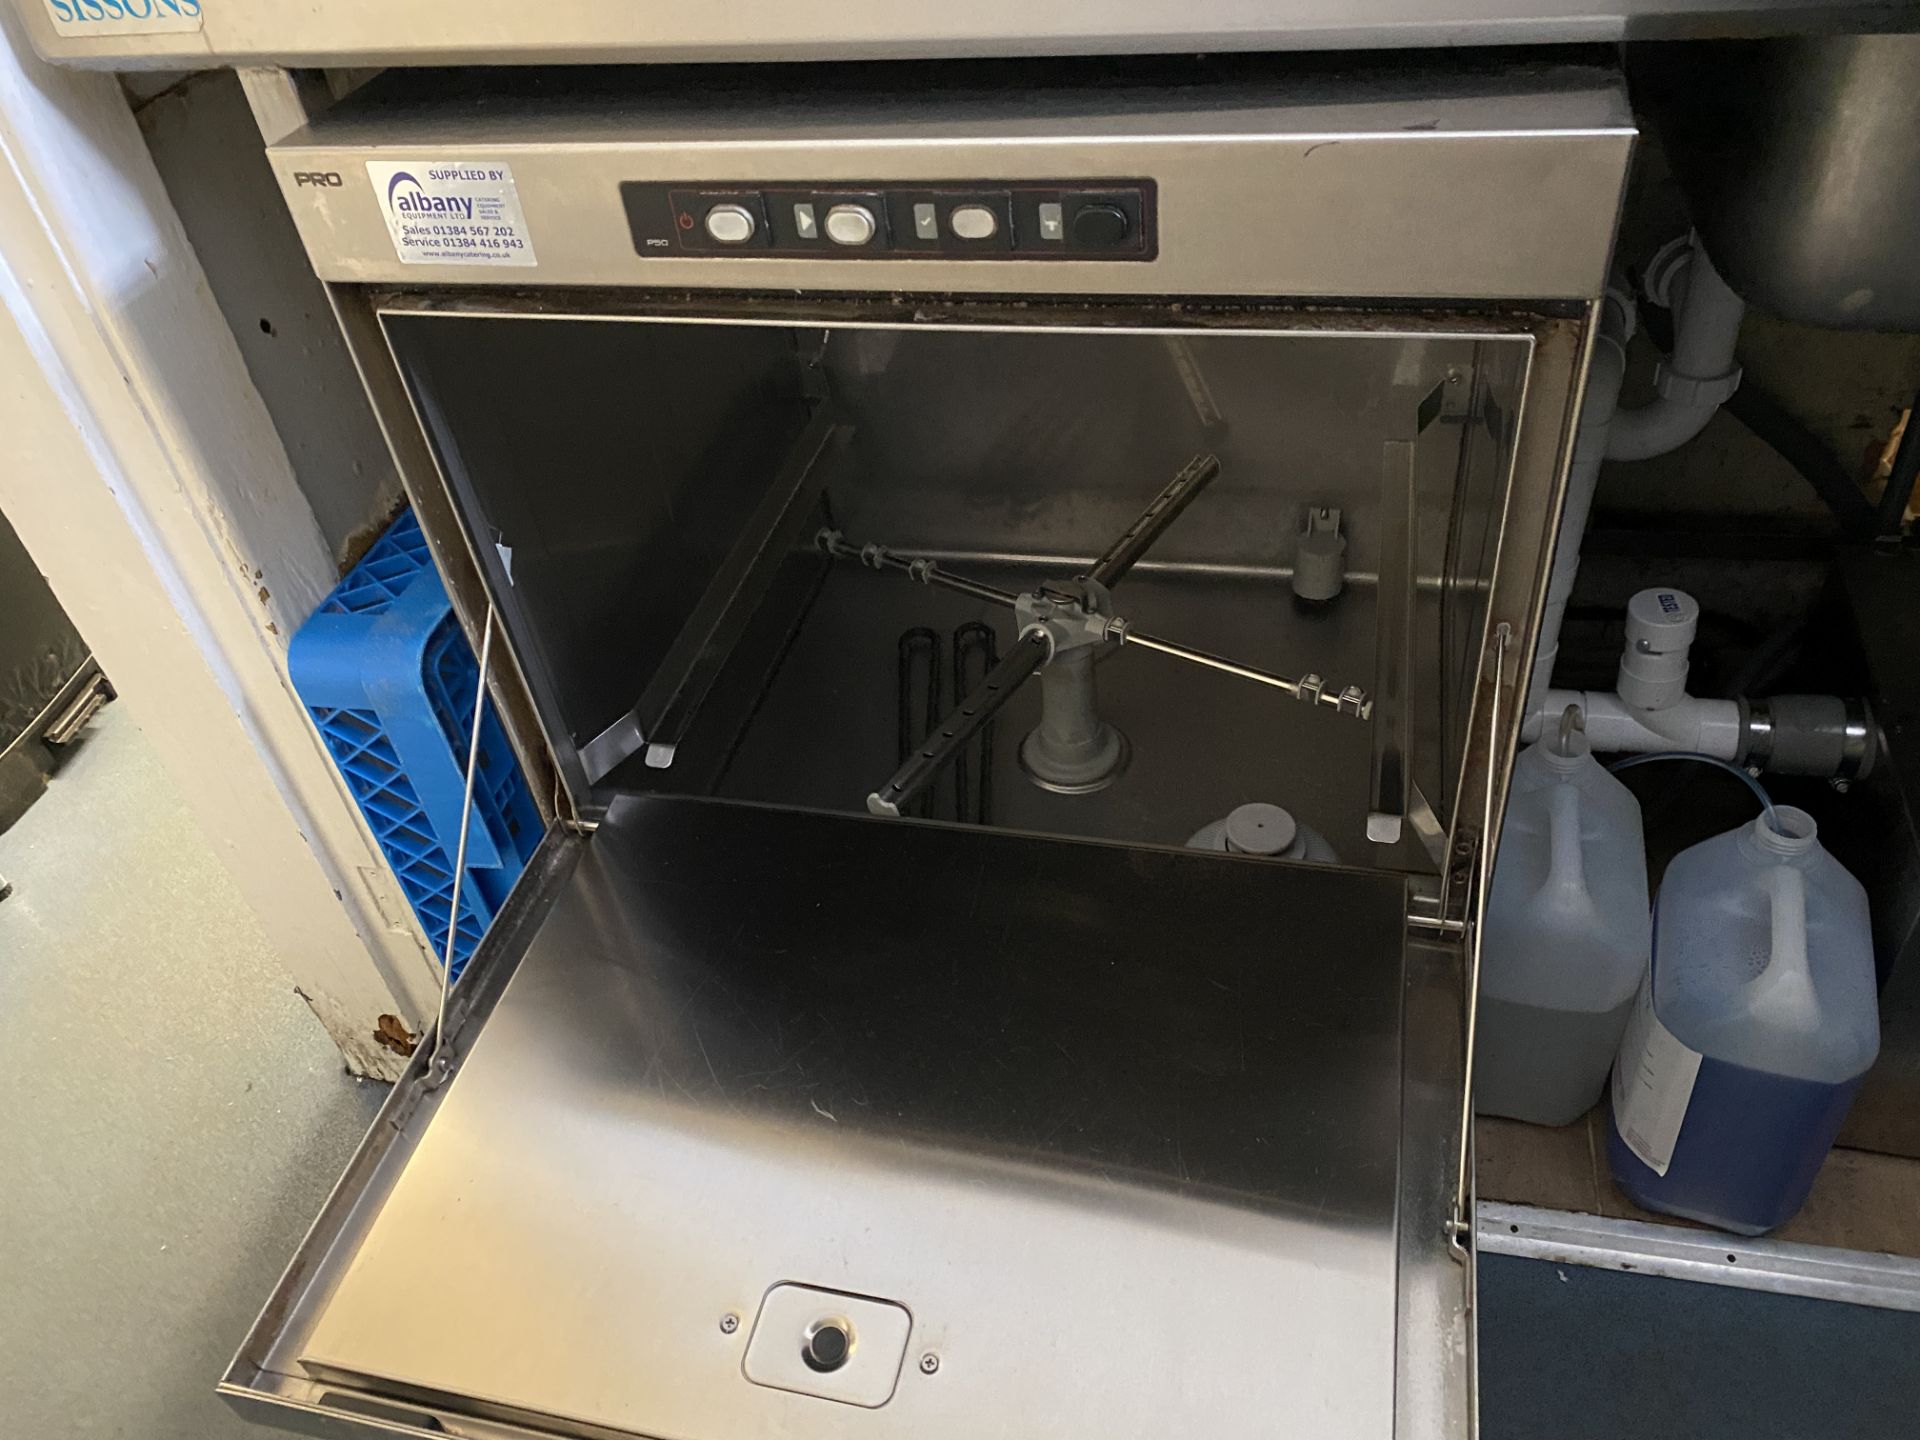 Sammic Pro Stainless Steel, Front Loading Dishwasher with 6 plastic trays and grease trap - Will - Image 5 of 8